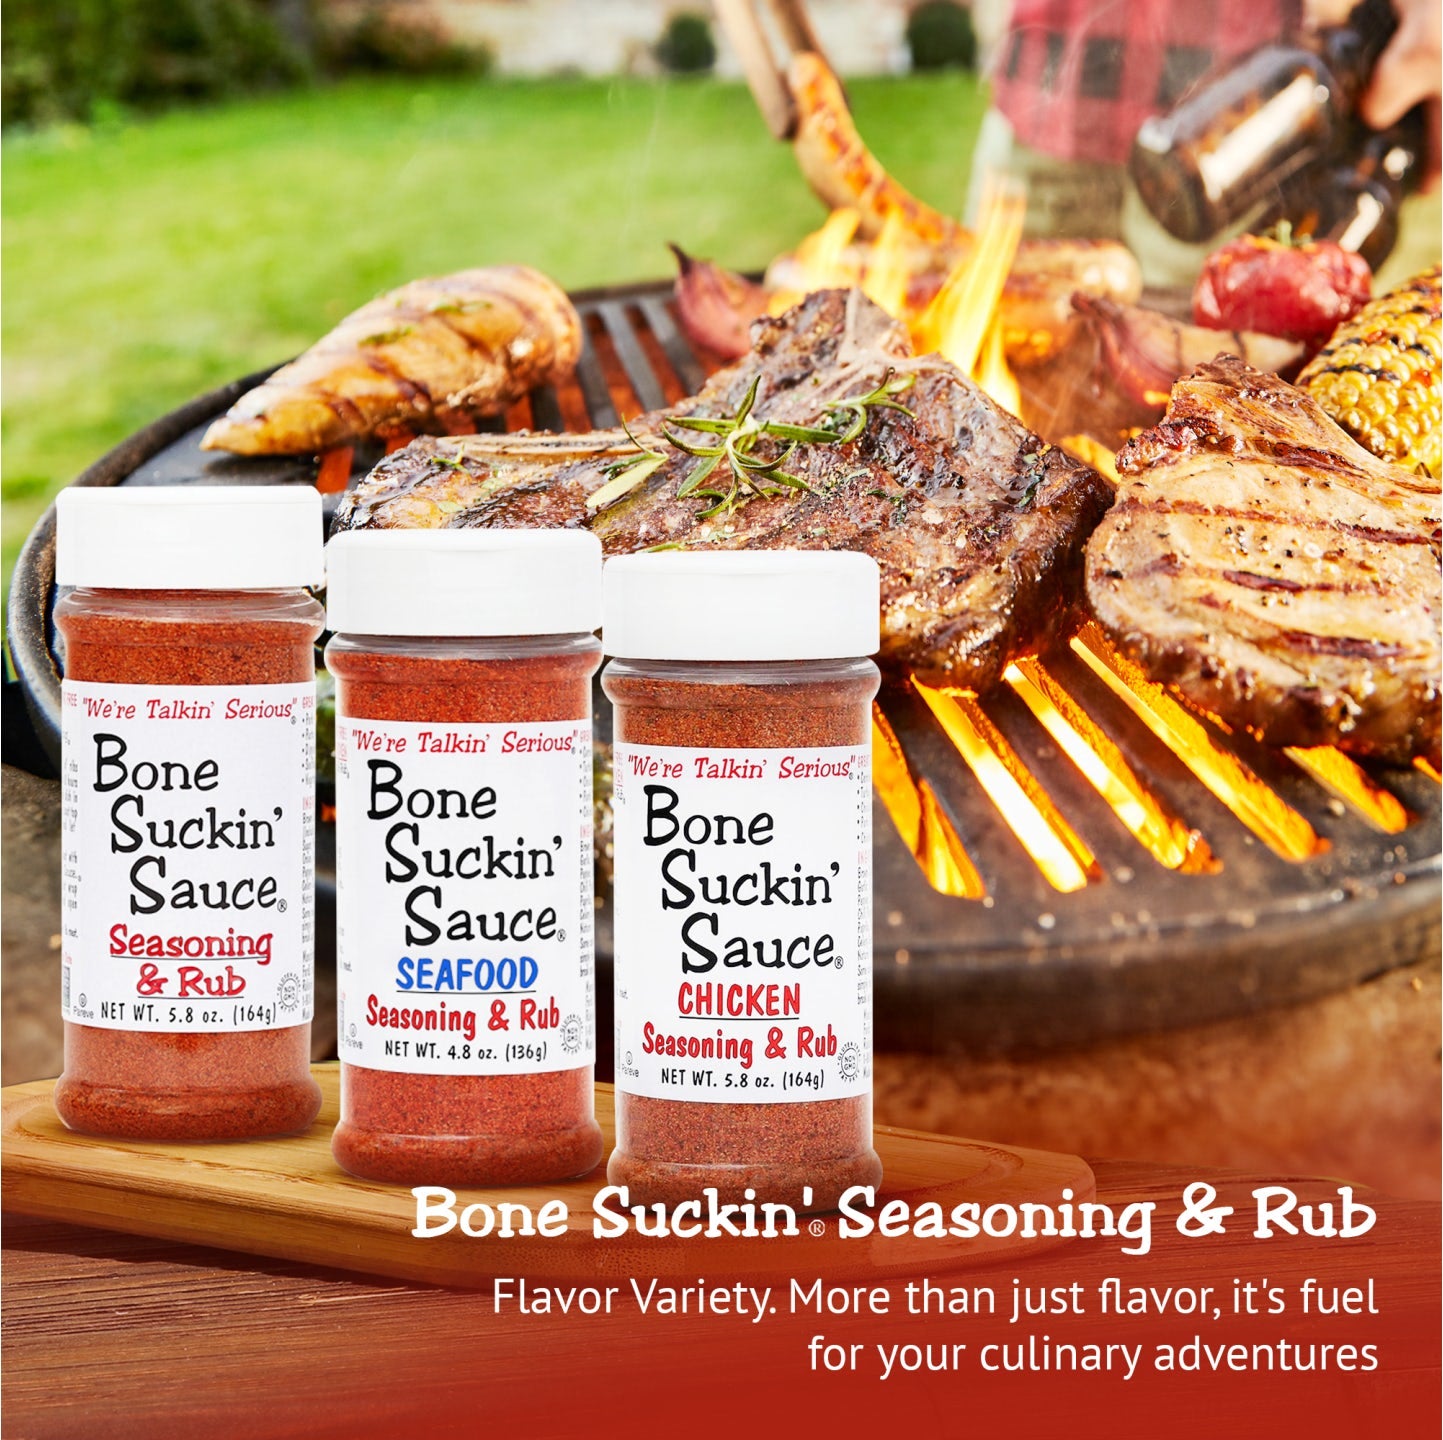 Bone Suckin Seasoning & Rub. Flavor variety. More than just flavor, it's fuel for your culinary adventures.